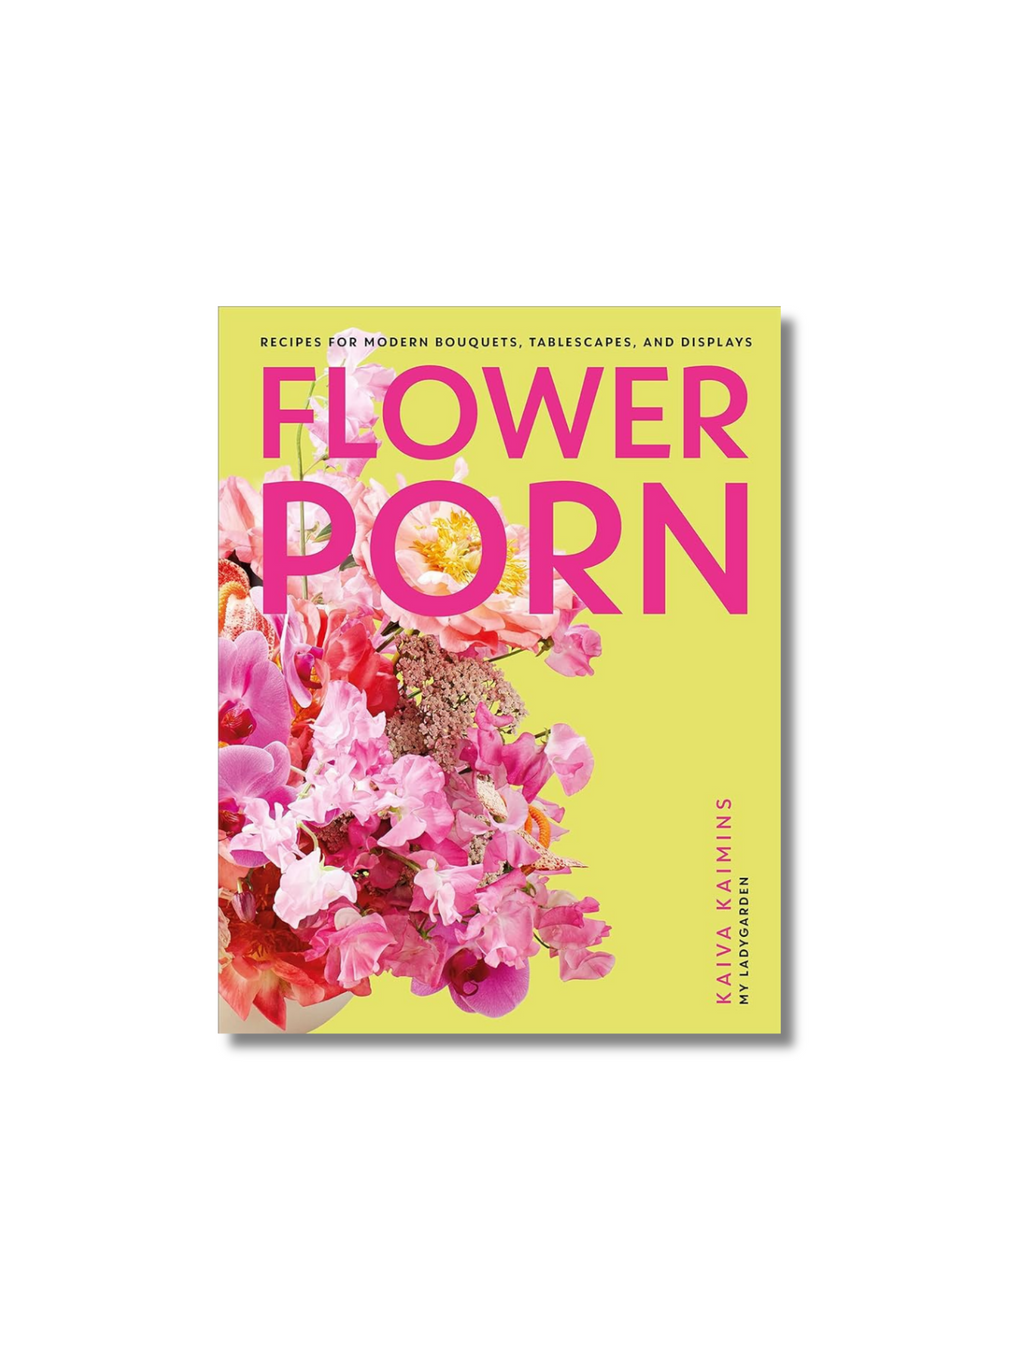 Flower Porn: Recipes for Modern Bouquets, Tablescapes and Displays